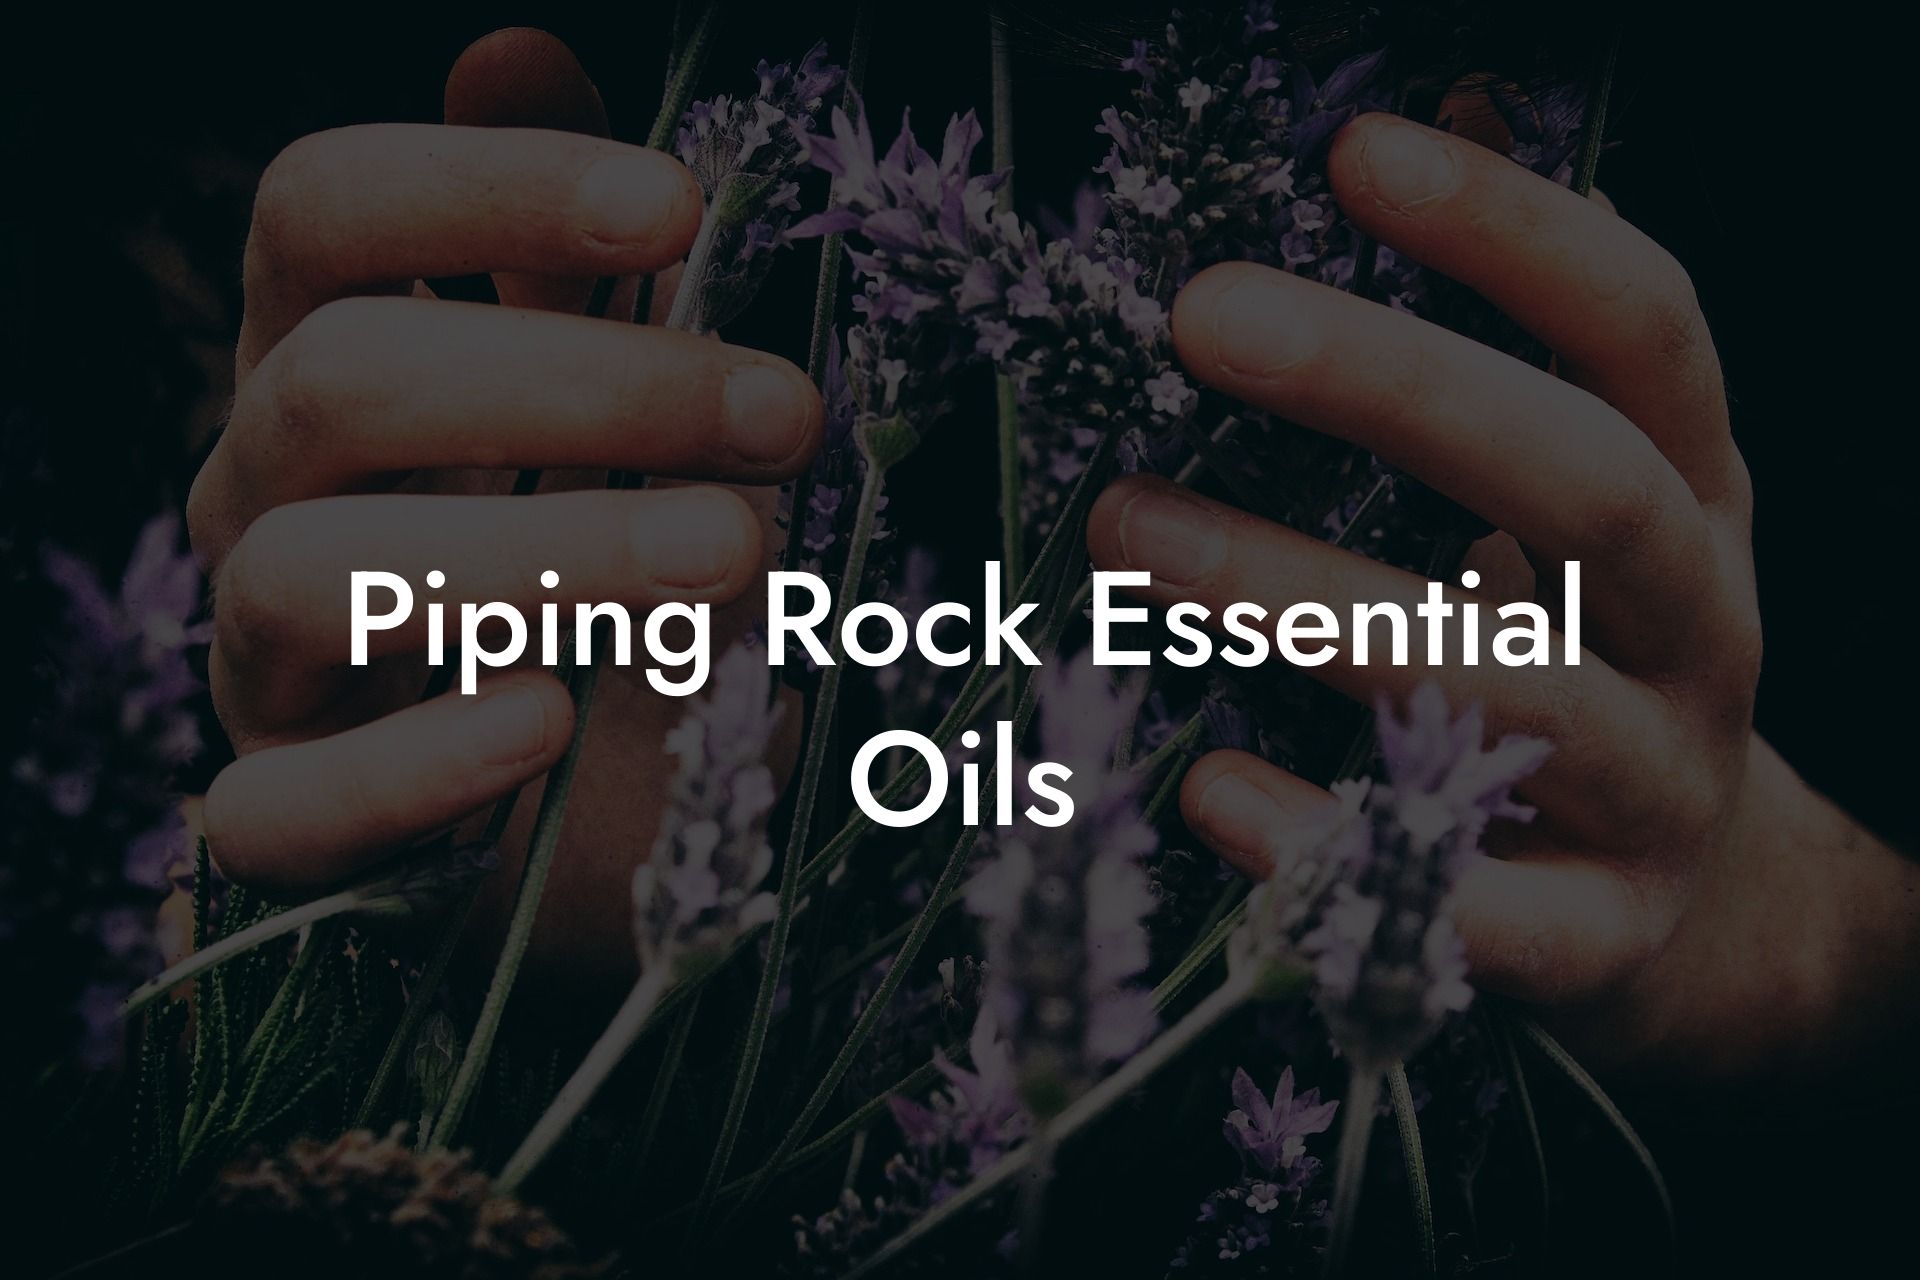 Piping Rock Essential Oils